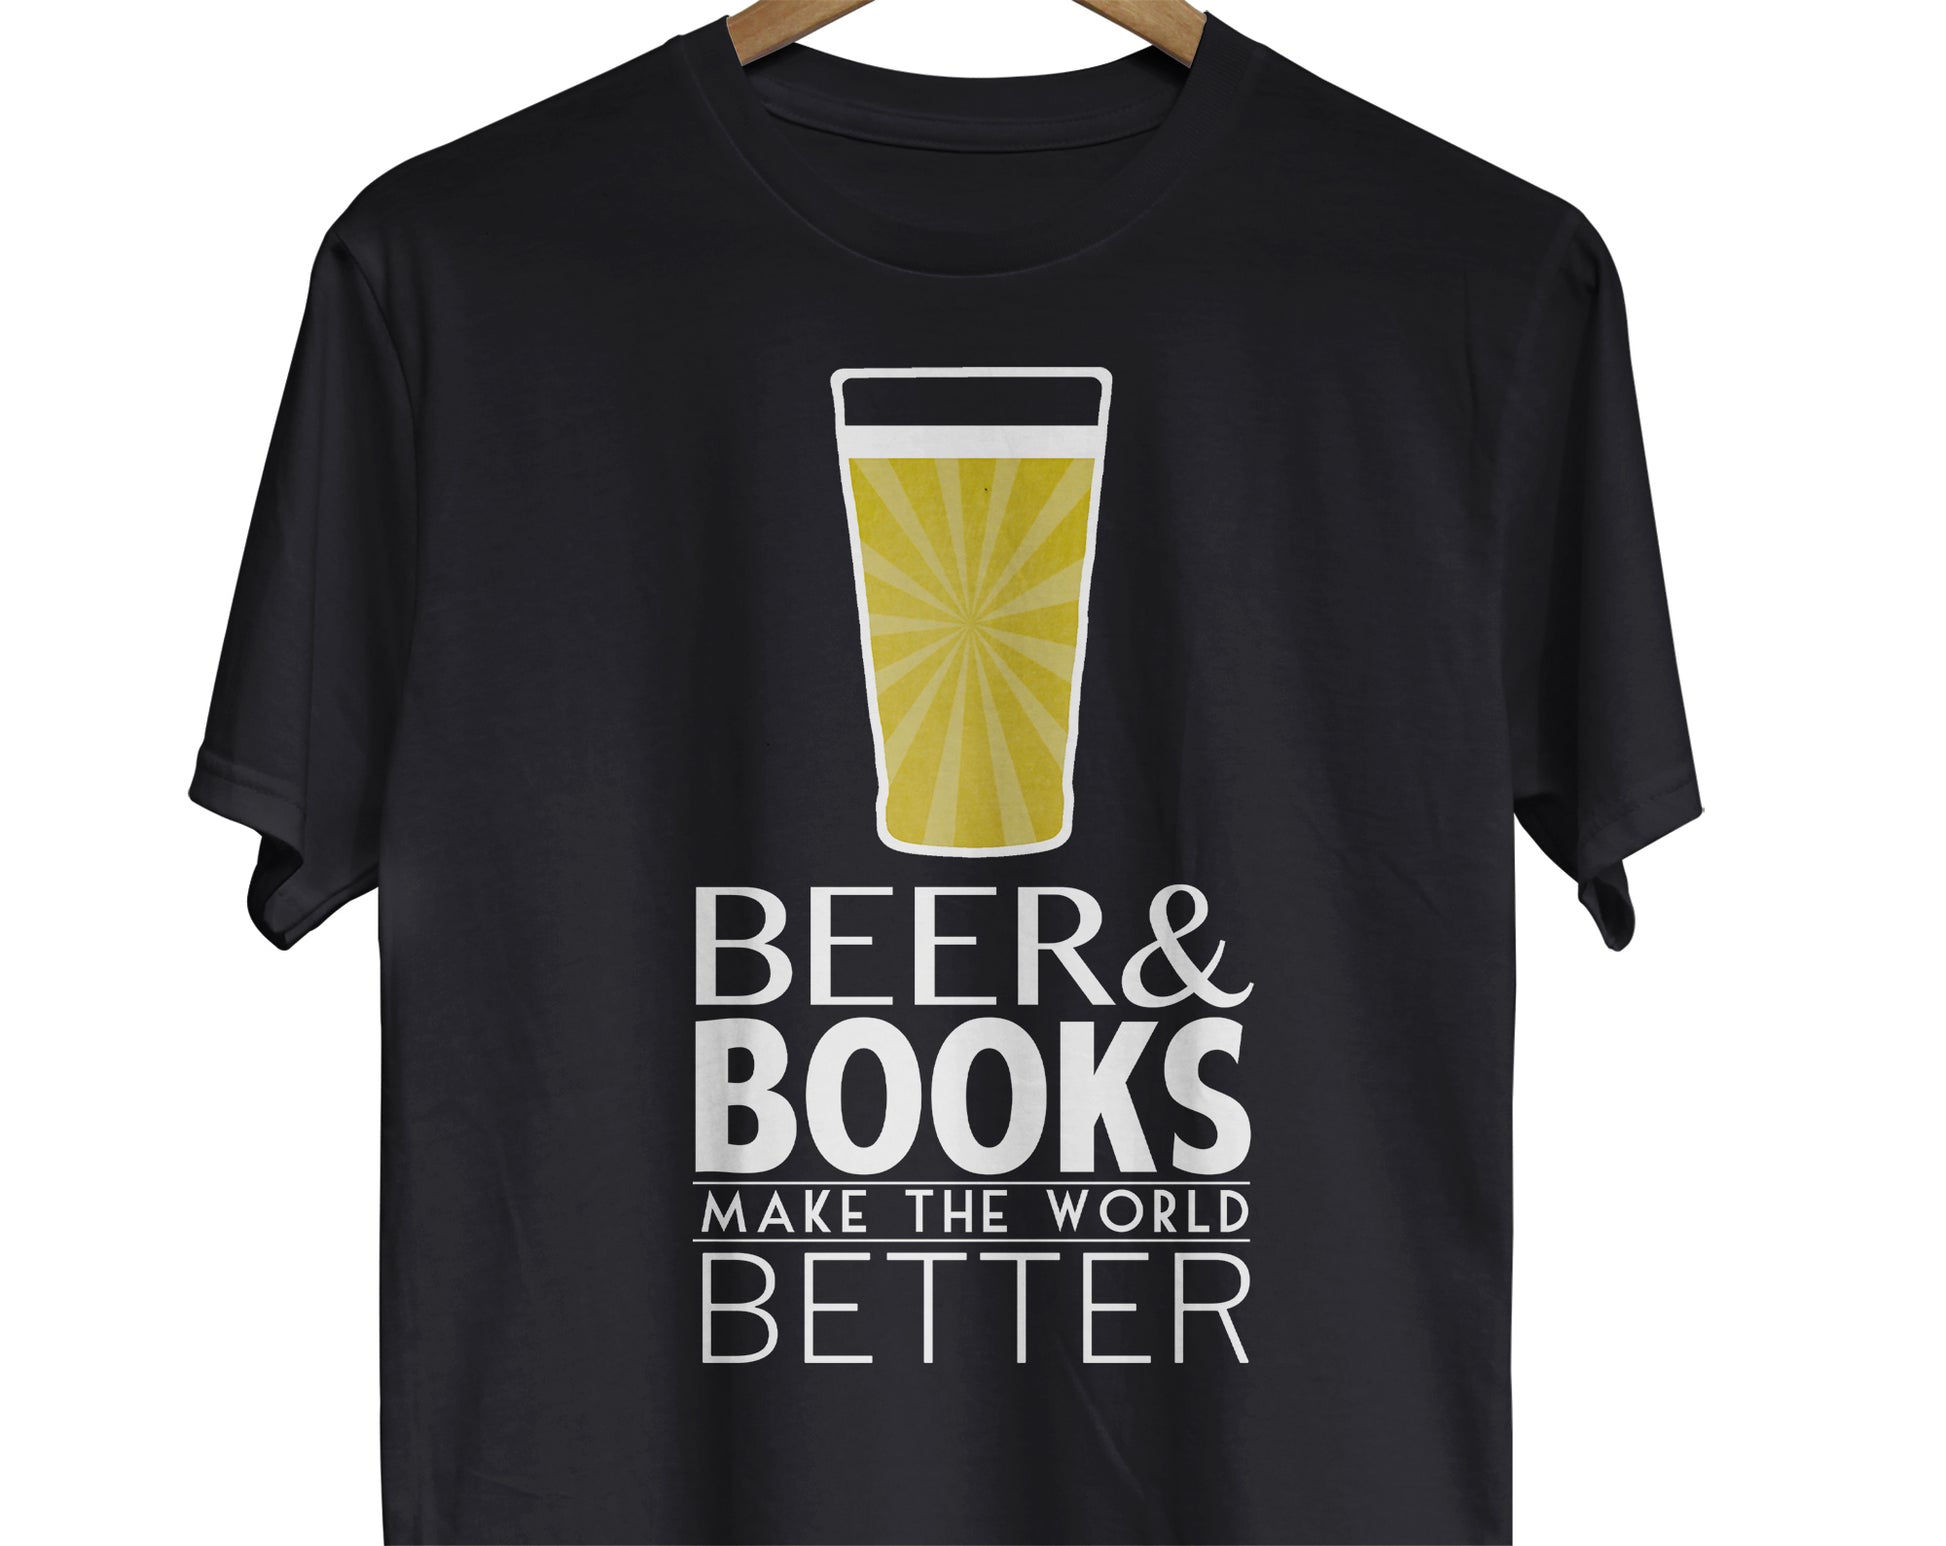 Beer and Books make the world better t-shirt